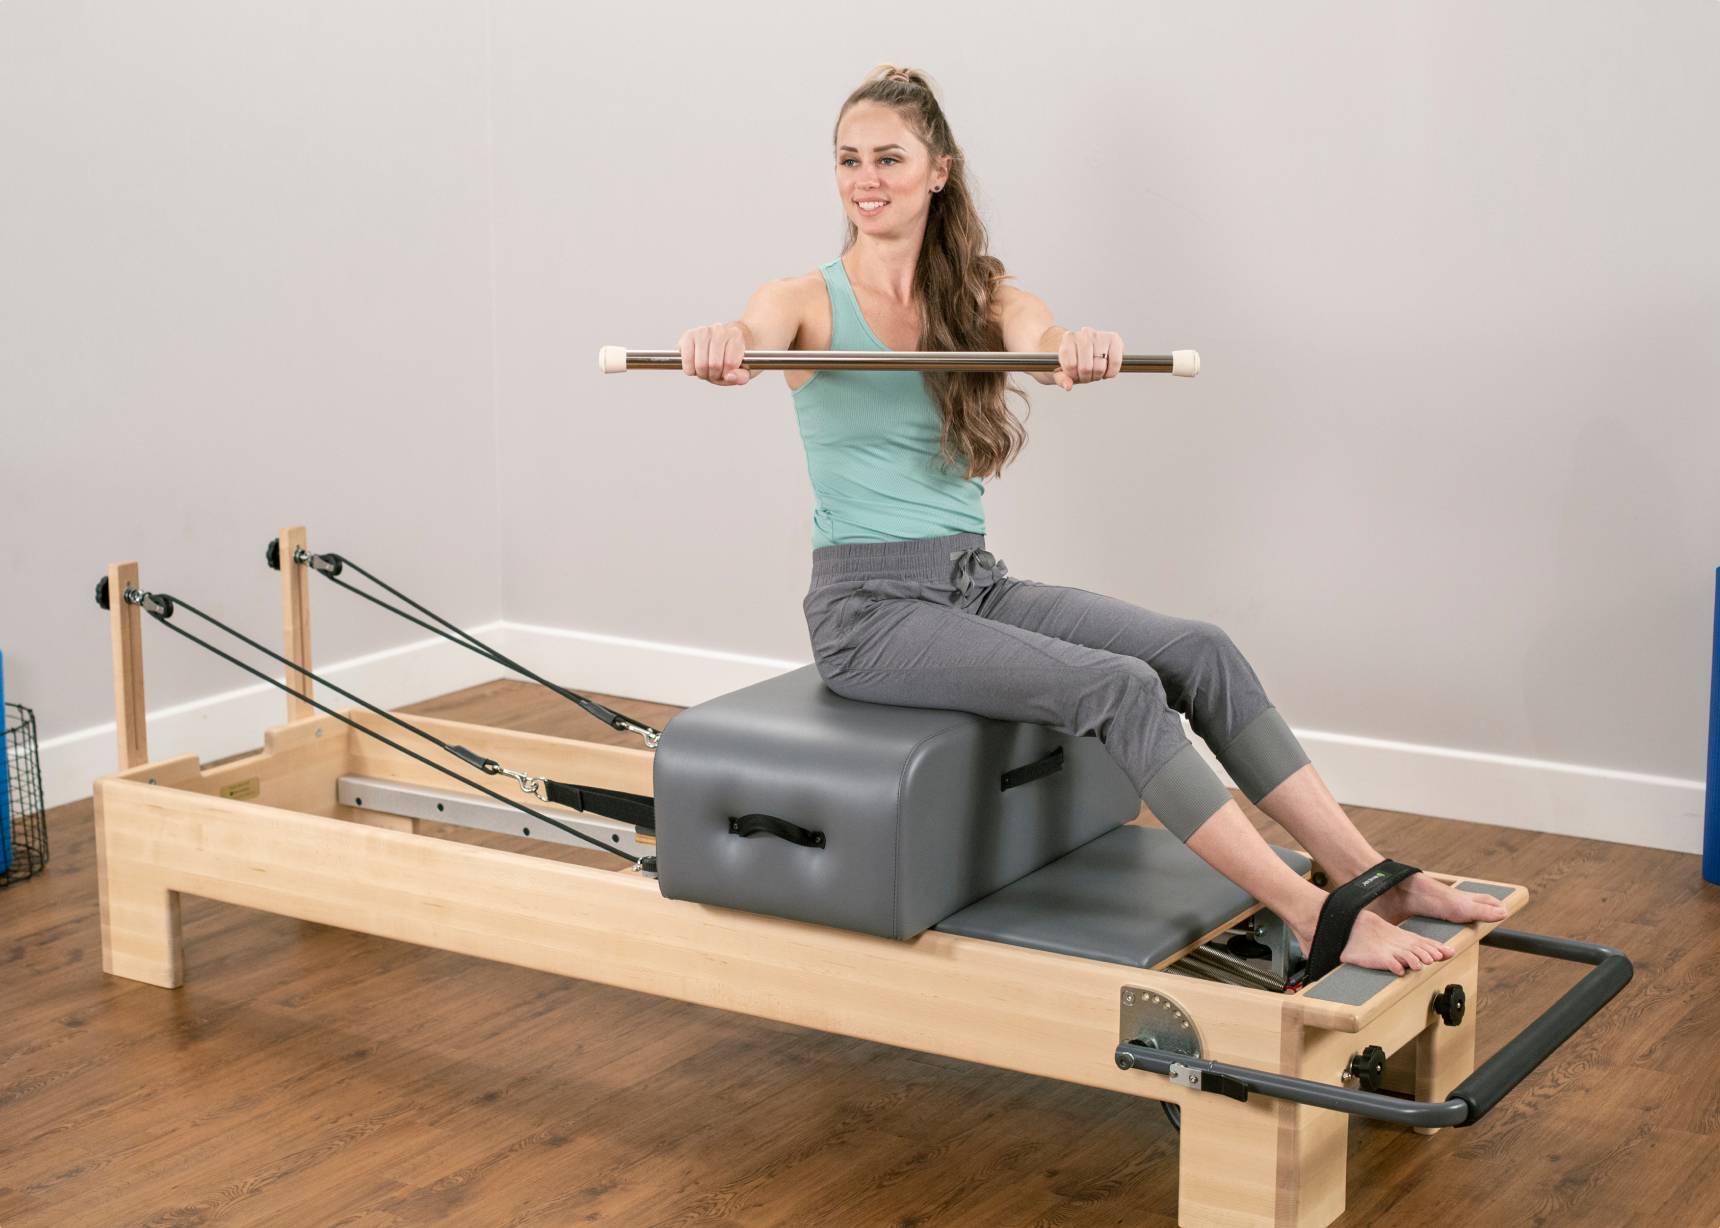 Pilates Sitting Box - Pilates Physical Therapist  Review 